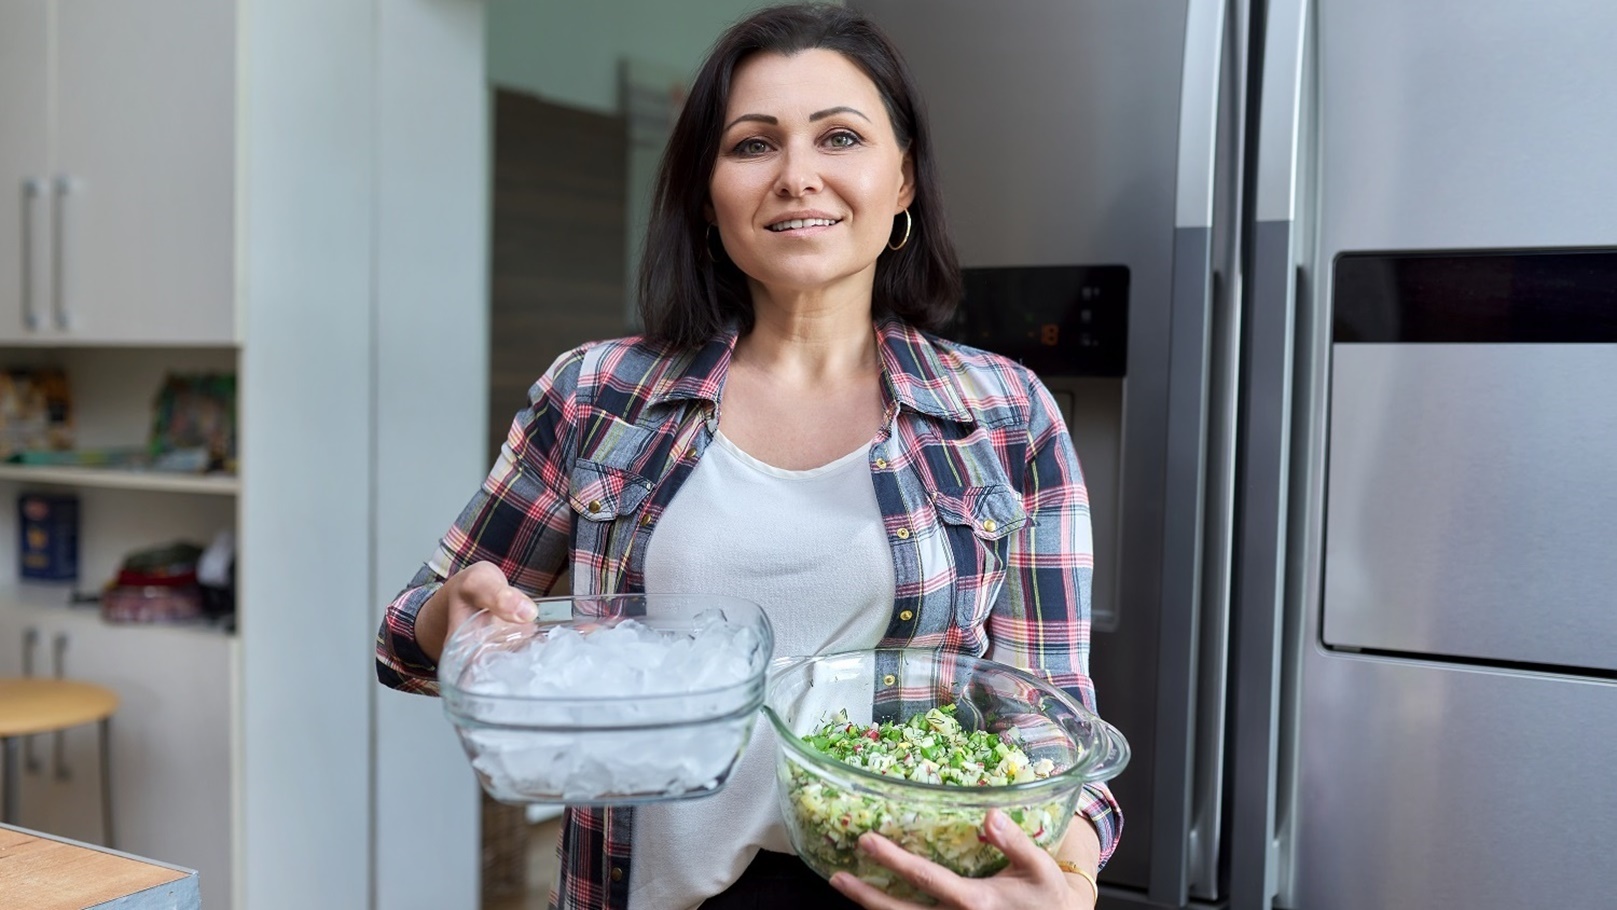 middle-aged-woman-in-the-kitchen-with-salad-and-a-2021-11-11-19-25-09-utc